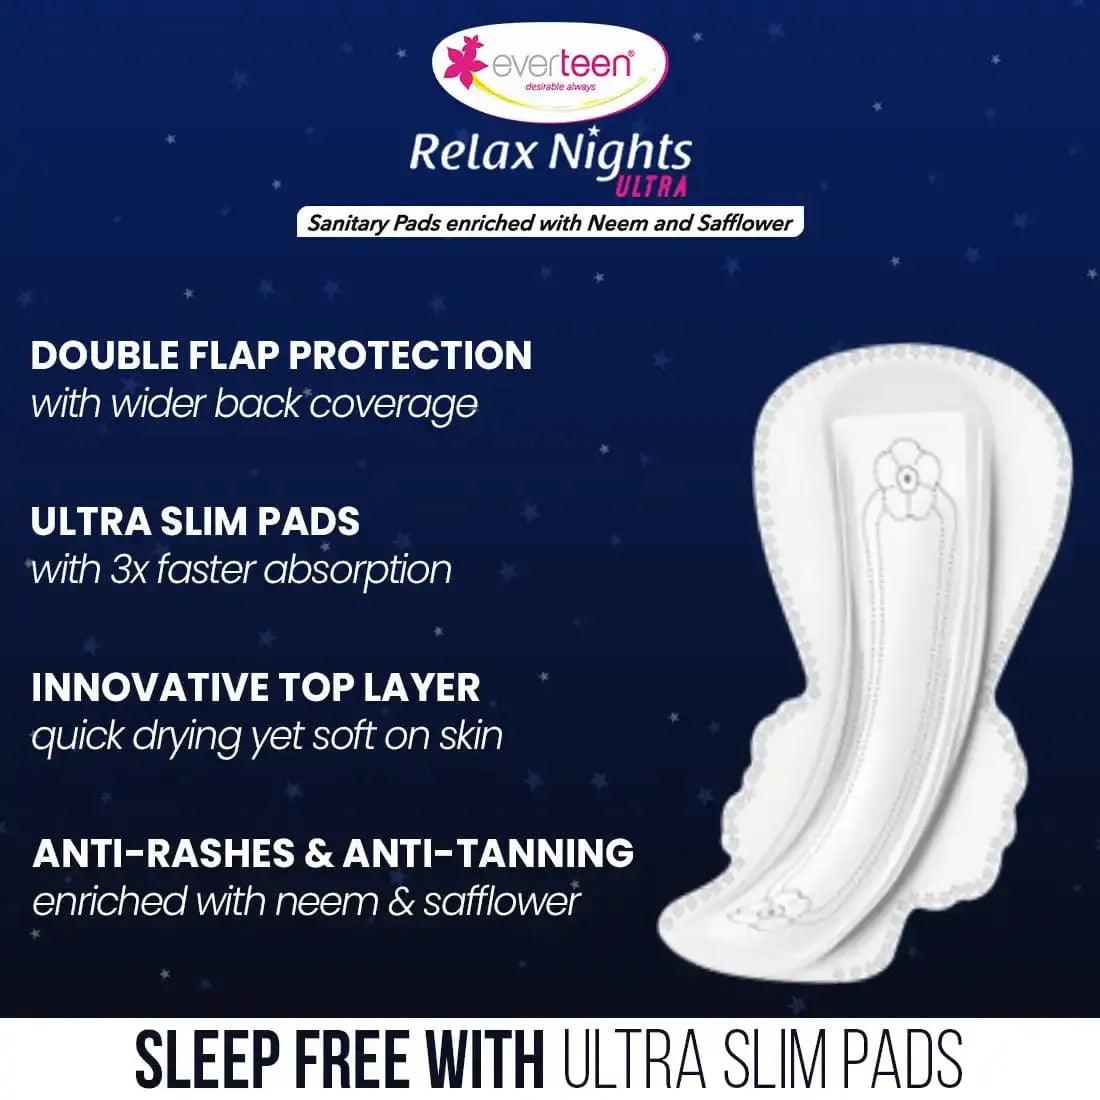 everteen XXL Relax Nights Ultra Thin 7 Sanitary Pads with Neem and Safflower 8906079331170